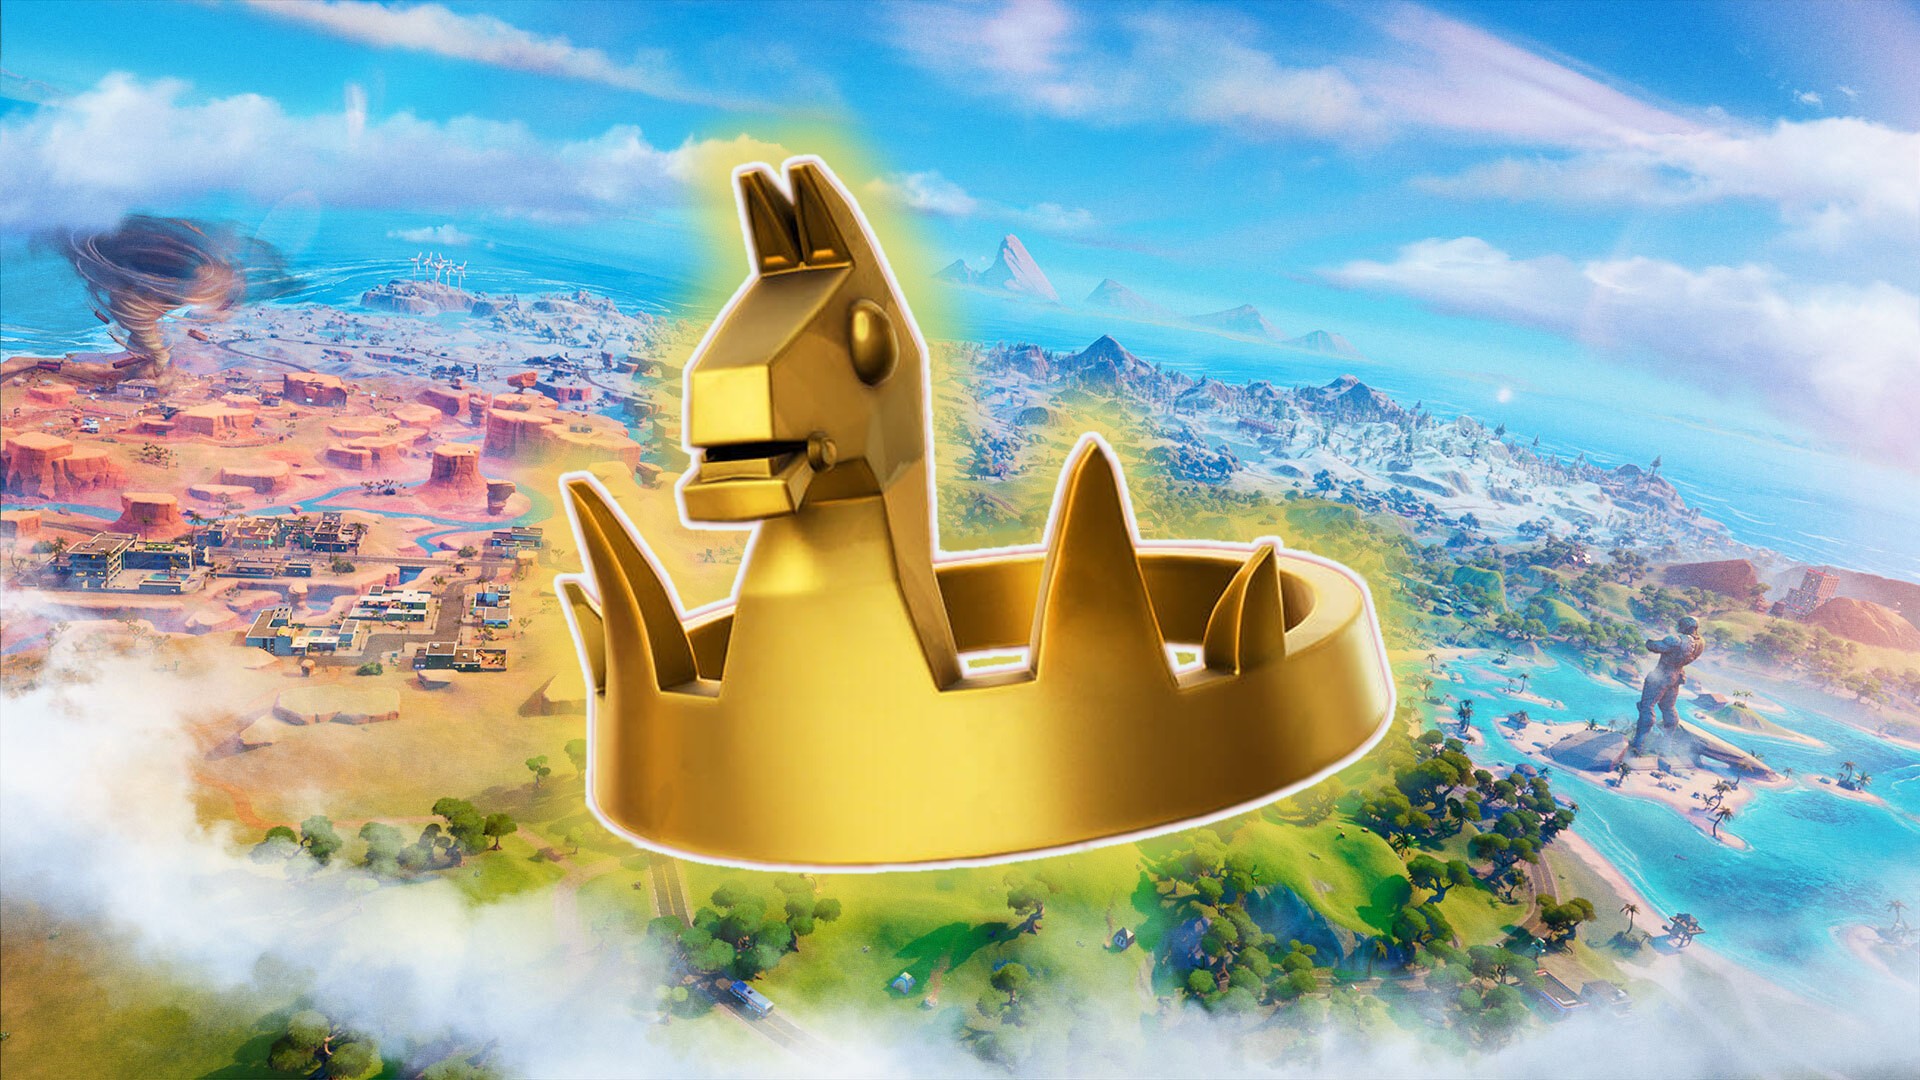 Fortnite victory crown – how to get the Fortnite crown and what it does